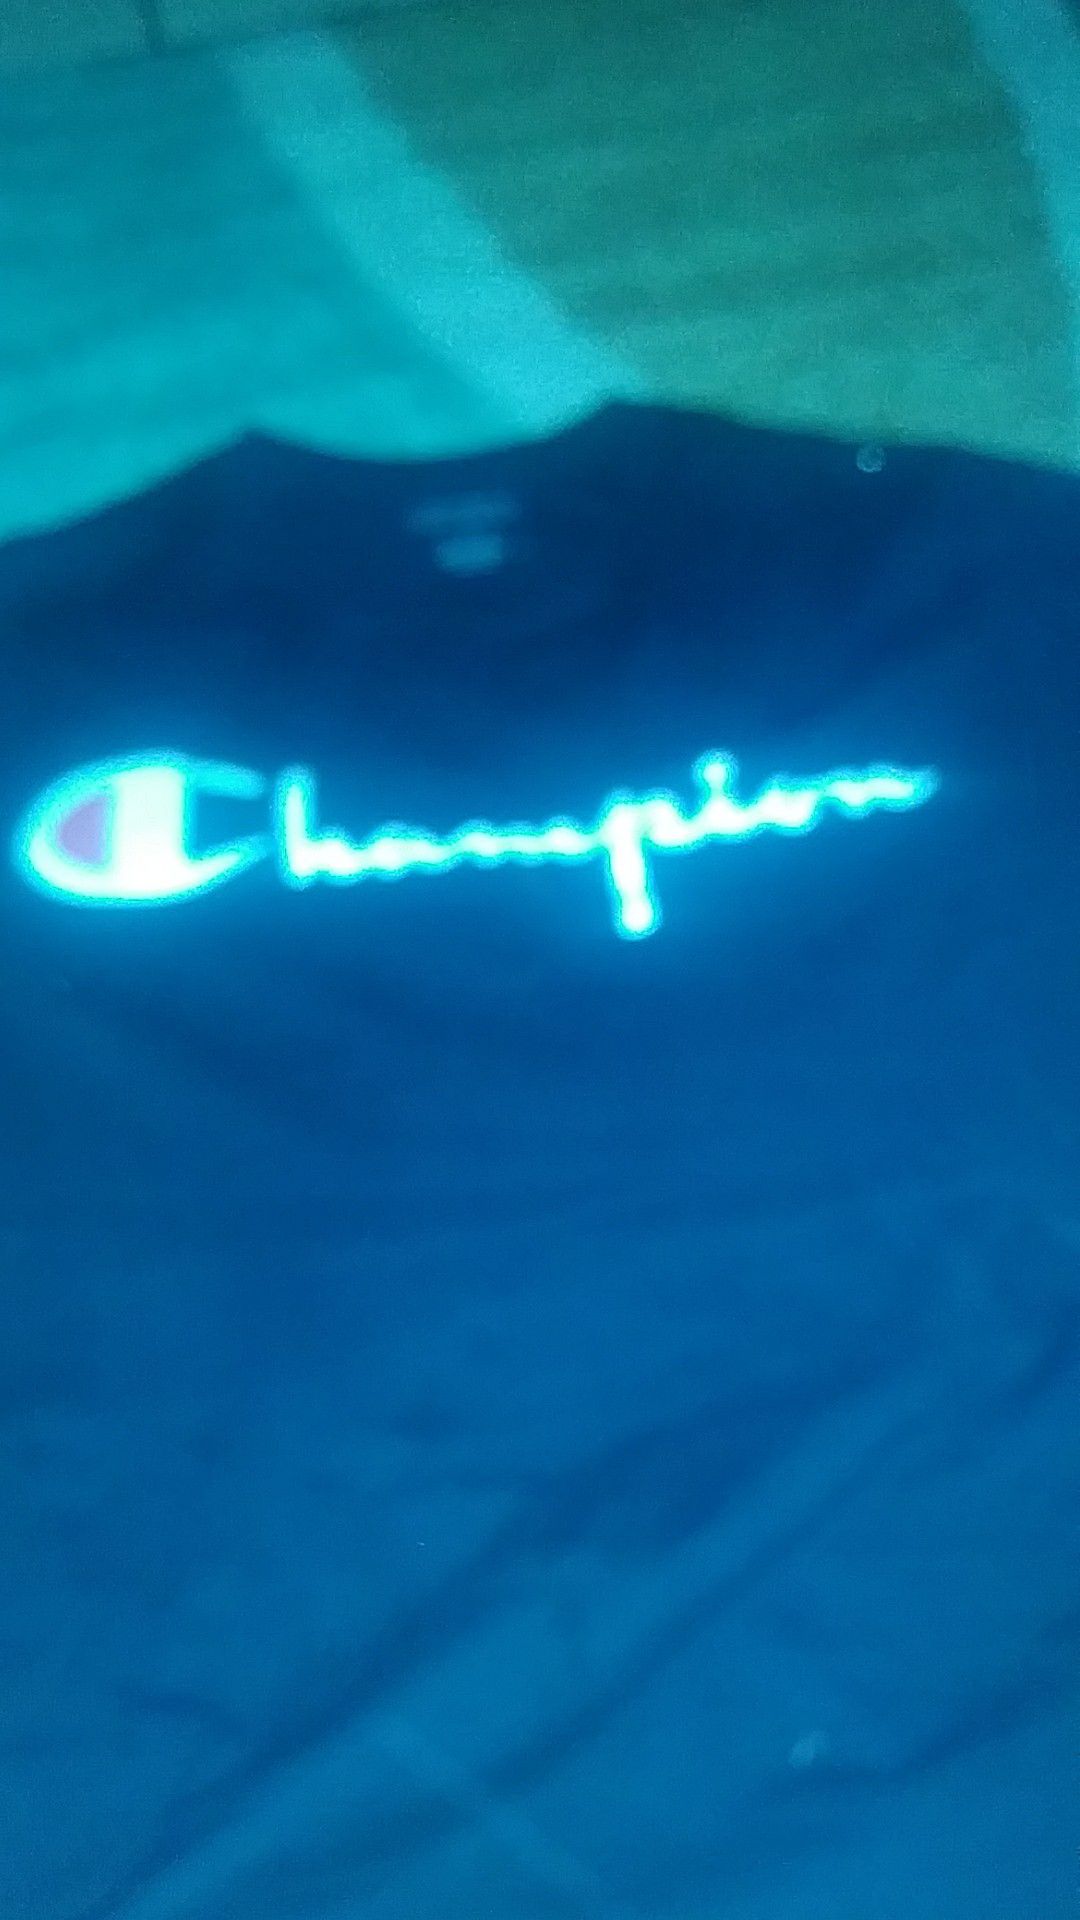 New champion word once